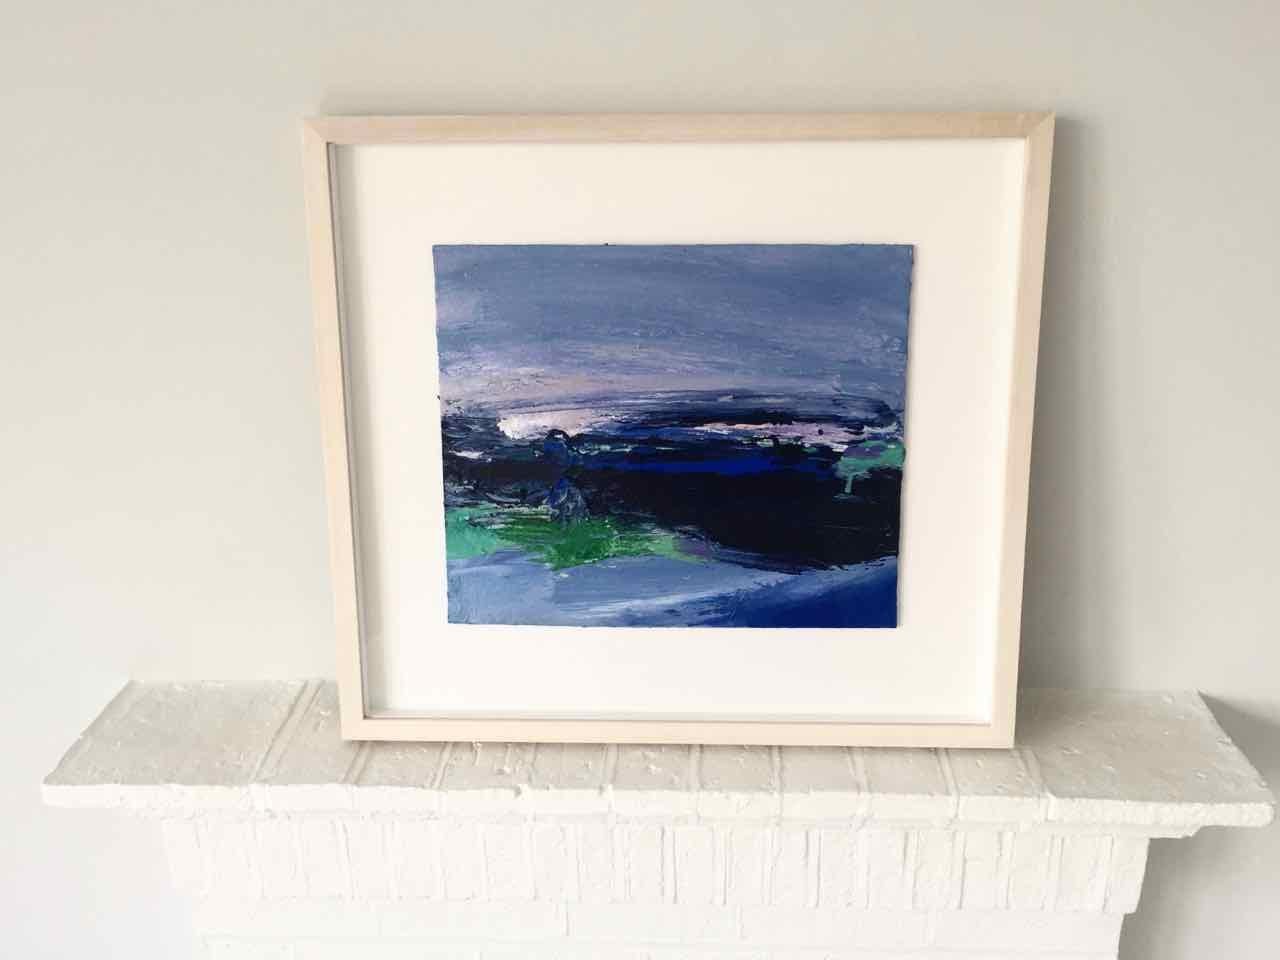 Salcombe Harbour: Small, Abstract, Gestural Painting in blue by Deborah Lanyon 1